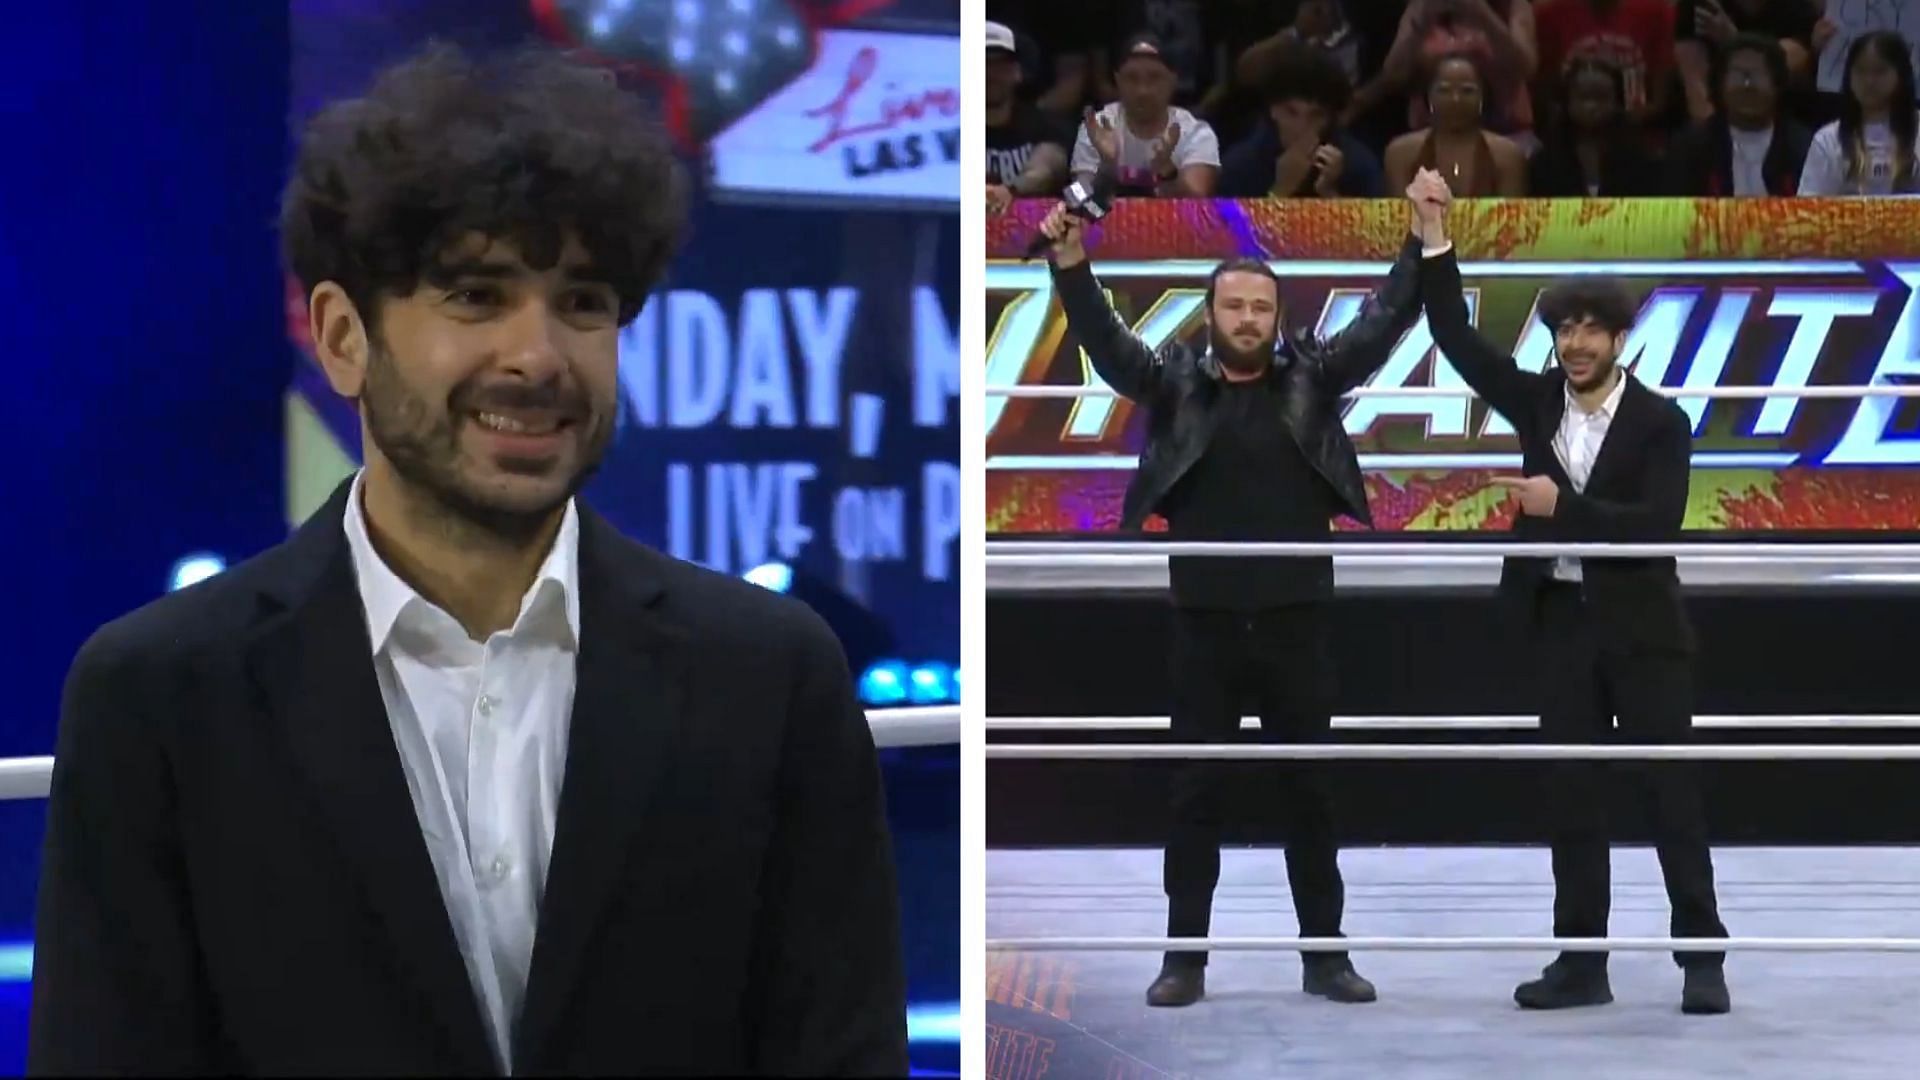 A scary incident took place on AEW Dynamite featuring Tony Khan